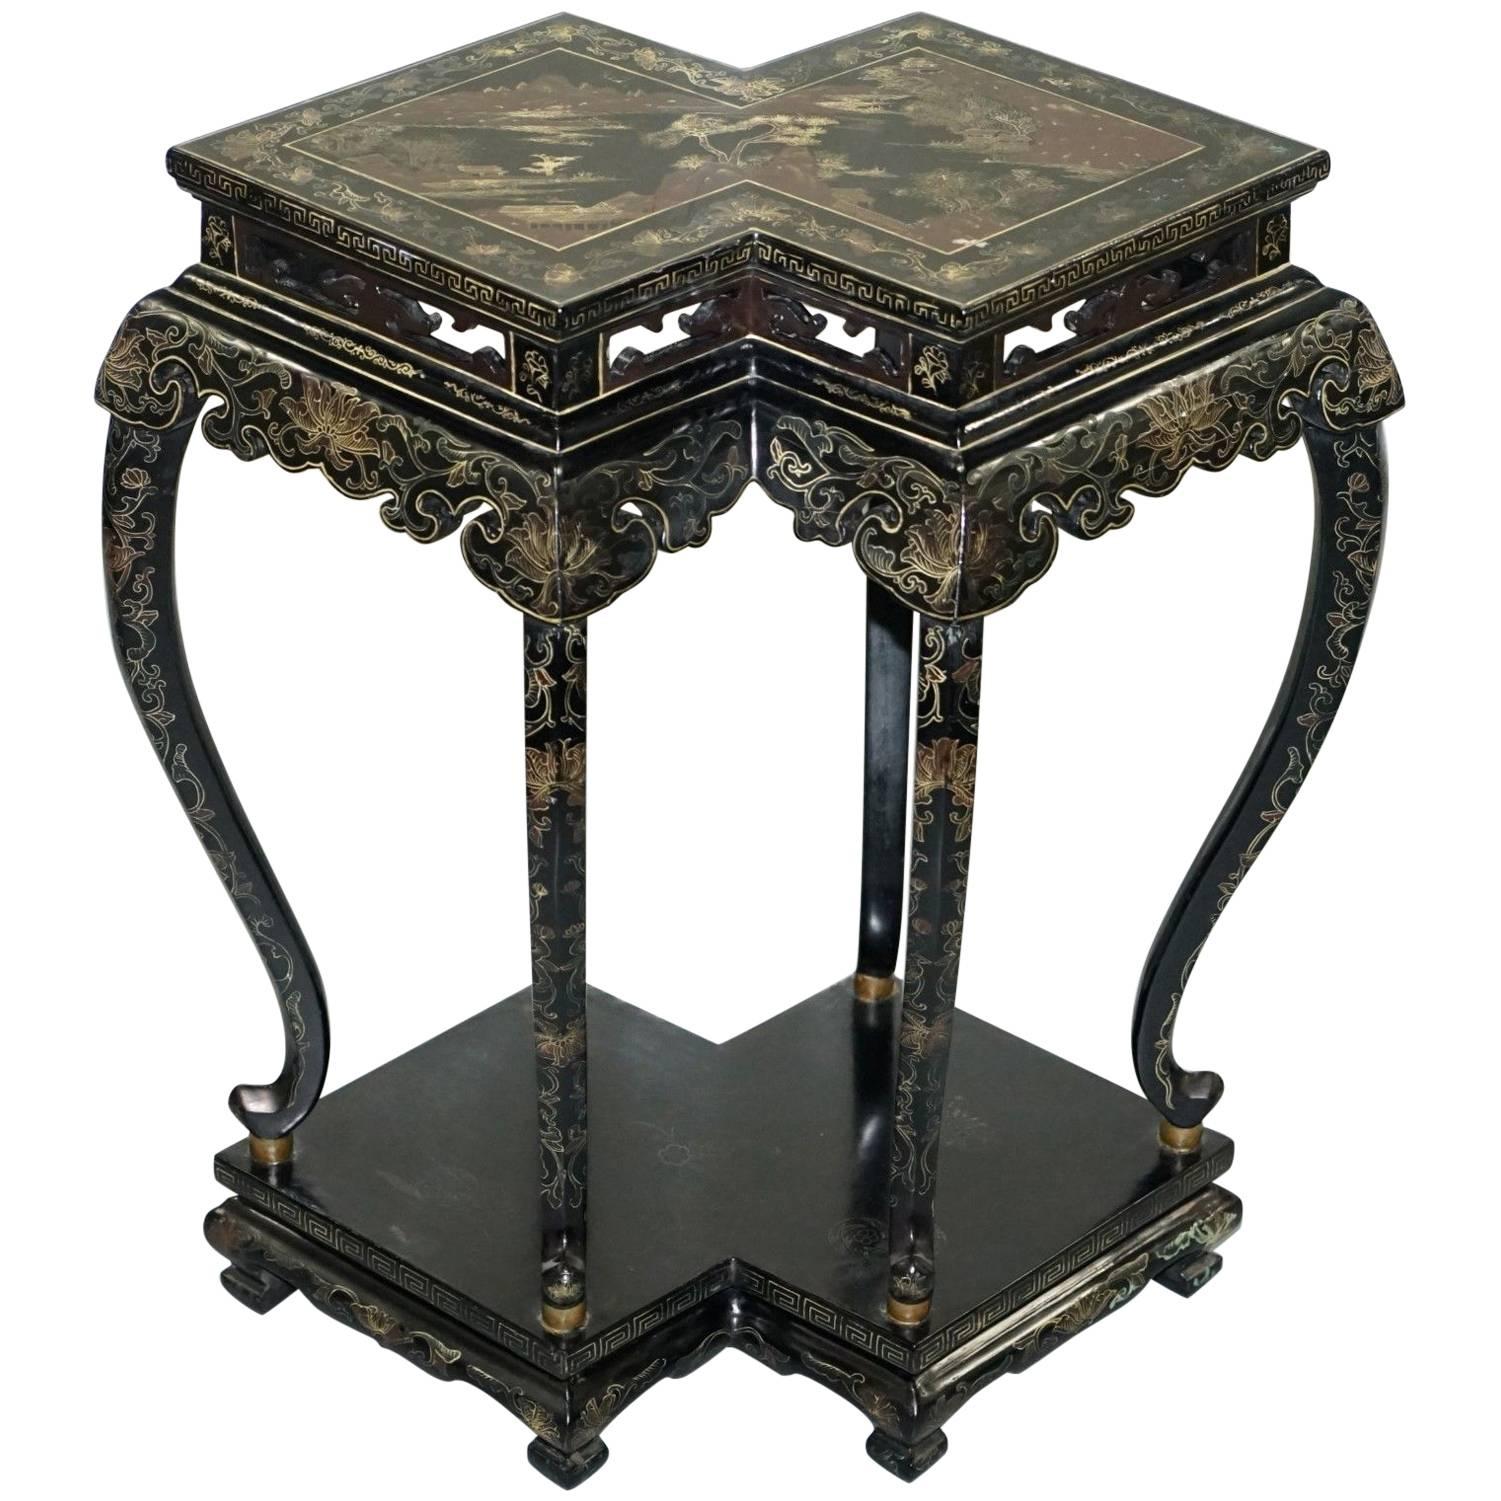 Hand-Painted 19th Century Chinese Chinoiserie Lacquered Jardinière Plant Stand